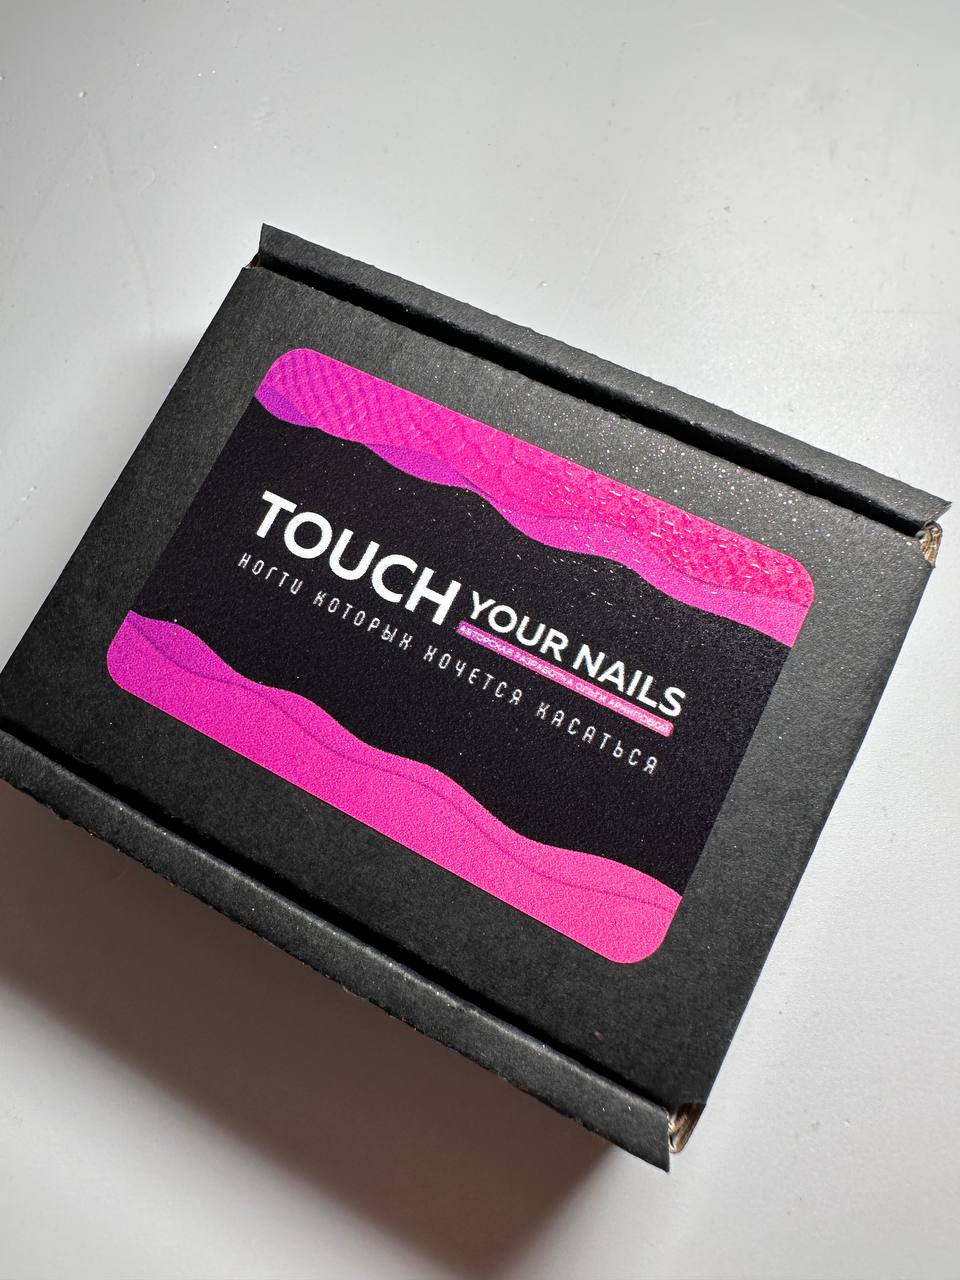 Touch Reptile 2 - Nails you want to touch